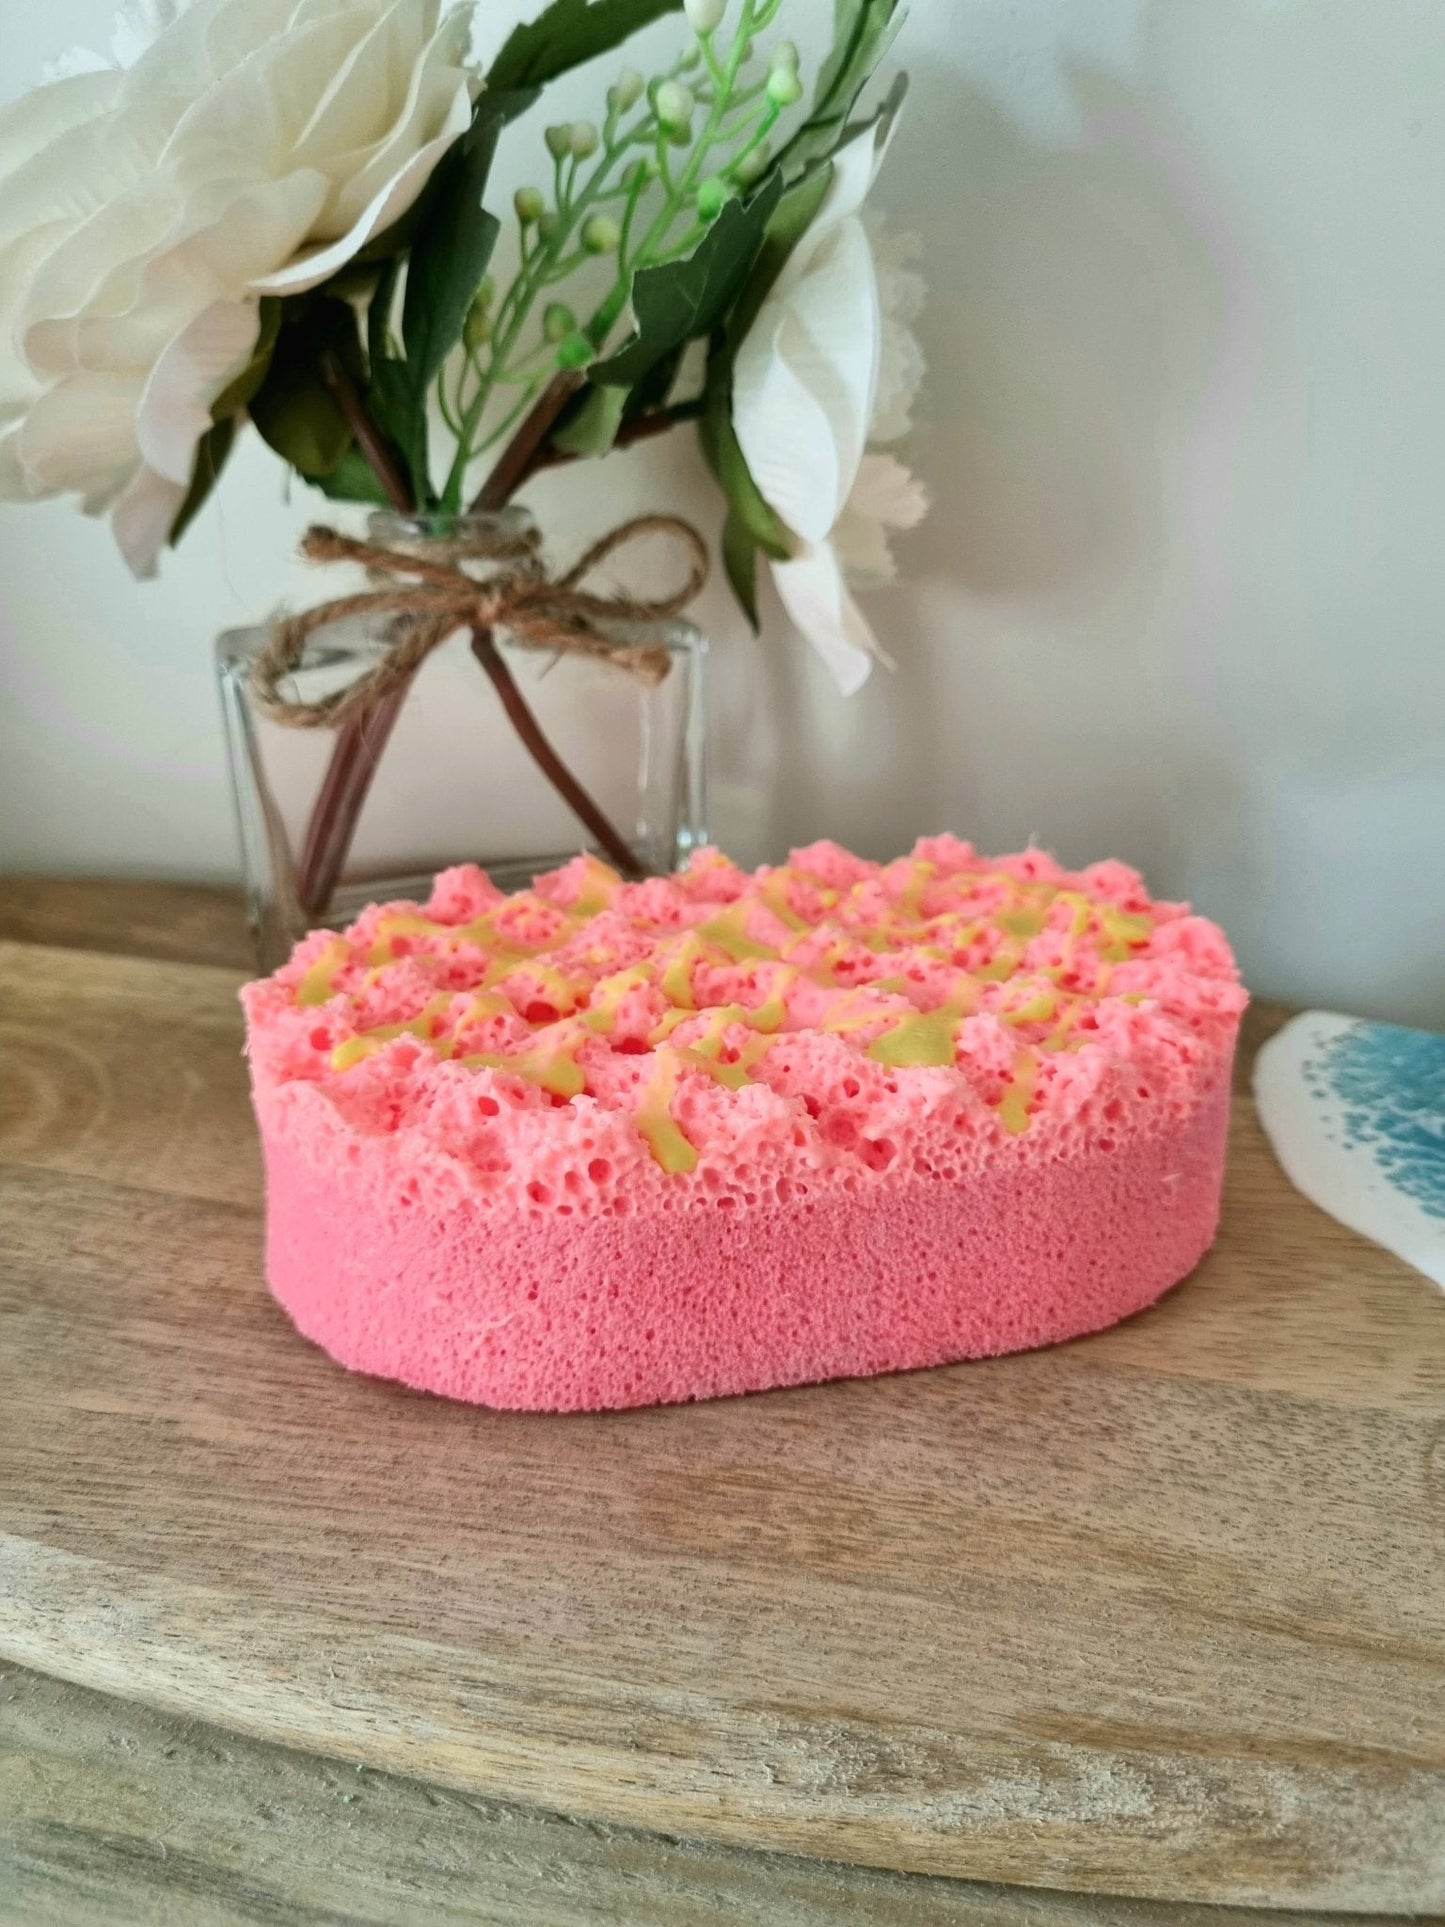 REDUCED TO CLEAR - "Whoopsie" Imperfect Soap Infused Exfoliating Massage Sponge - Soap Sponge - Cottage Fresh Scents